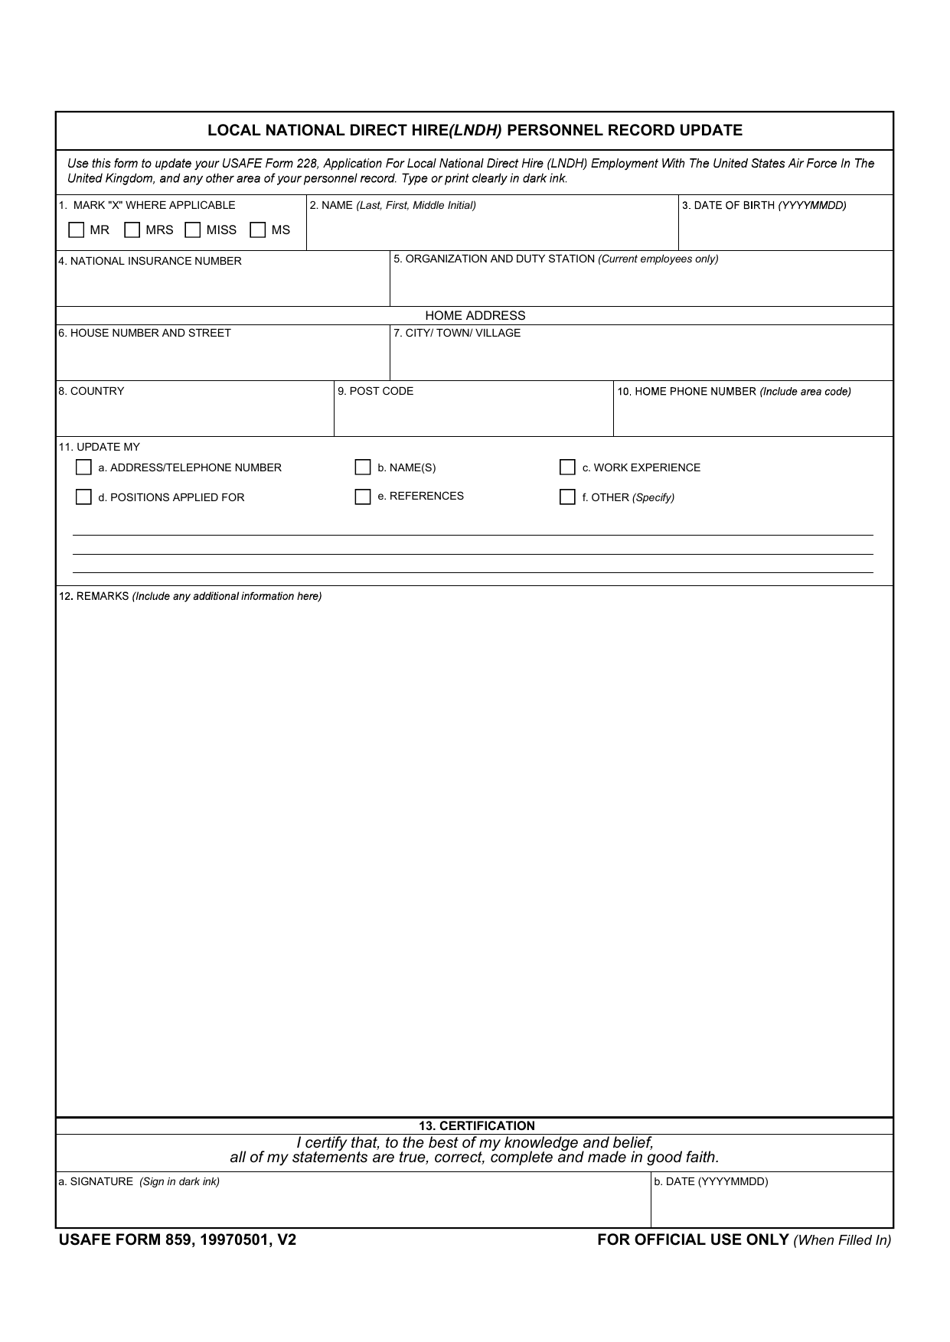 USAFE Form 859 Local National Direct Hire (Lndh) Personnel Record Update, Page 1